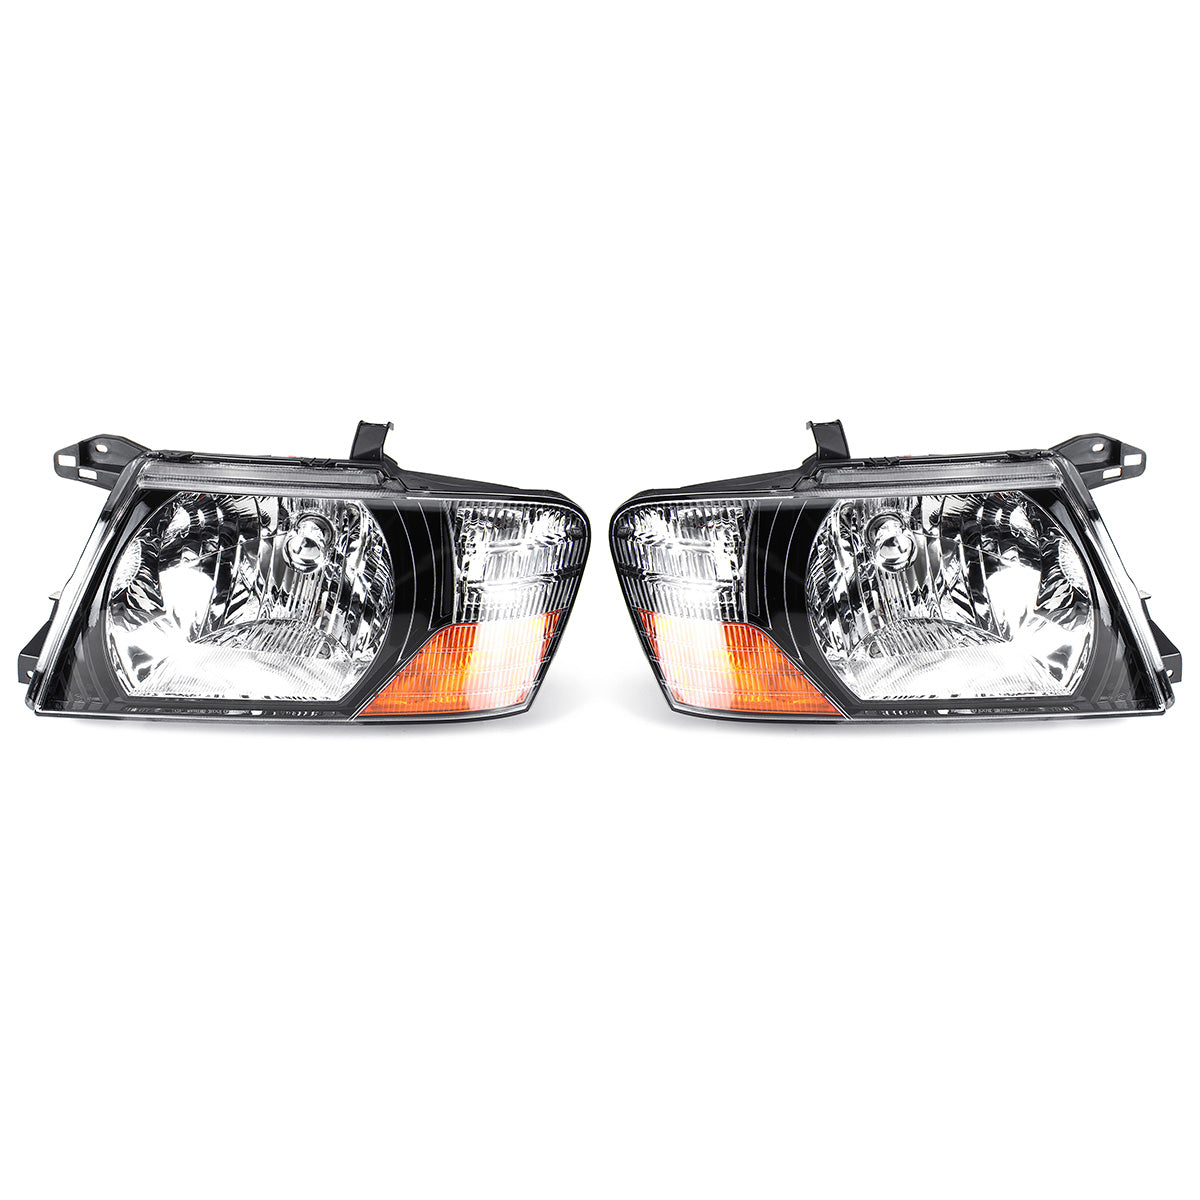 Coral Car Front Headlight Head Lamp Assembly Glass Lens Cover Pair for Mitsubishi Pajero Montero 2000-2006